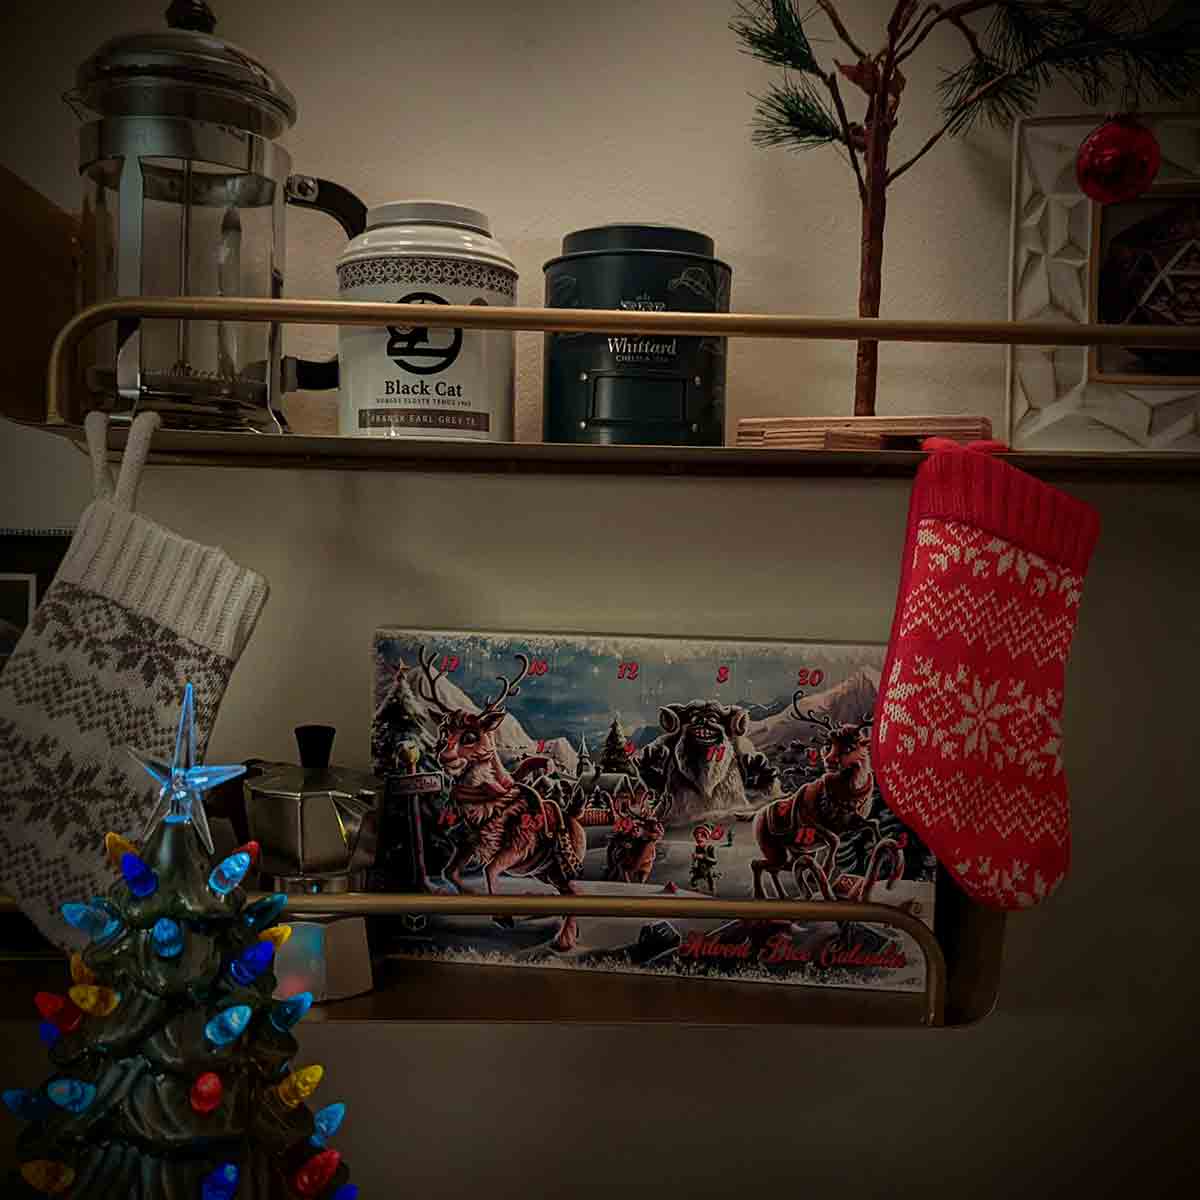 Two brass metal shelves mounted to a white wall and lit by ambient light; the top shelf has two tea tins, a French press, and a sad Charlie Brown Christmas tree along with a framed print; the second shelf has a tiny moka pot and a dice advent calendar; tiny stockings in a knit geometric snow pattern hang off the top shelf and a ceramic tree with lighted bulbs mounted to it are in the foreground.